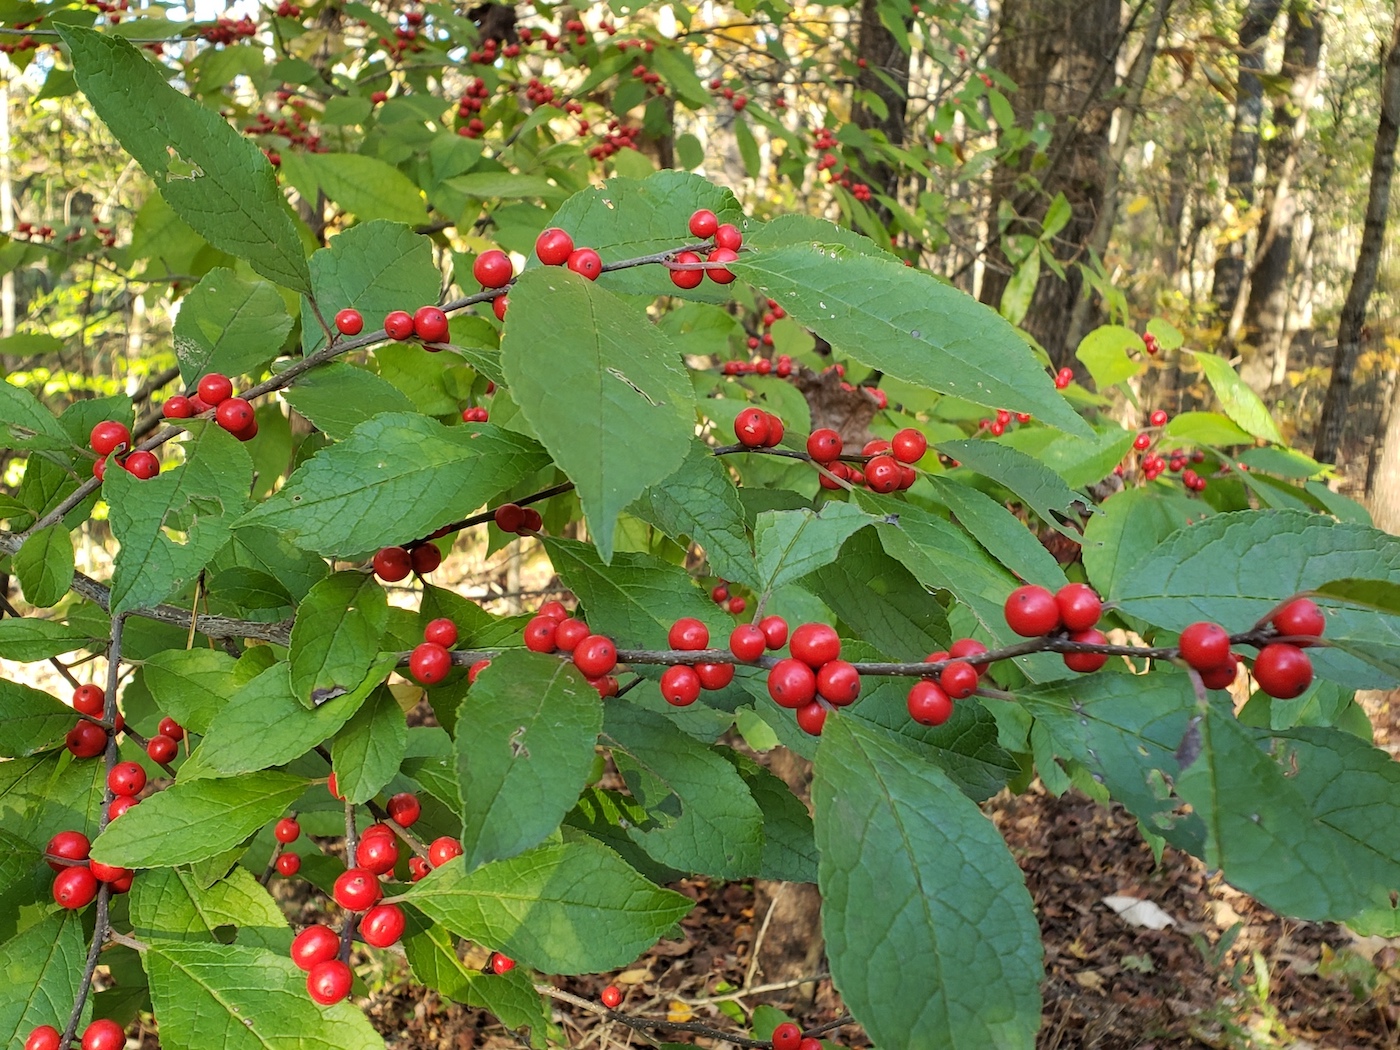 The Scientific Name is Ilex verticillata. You will likely hear them called Common Winterberry. This picture shows the Beautiful red drupes in the Fall of Ilex verticillata